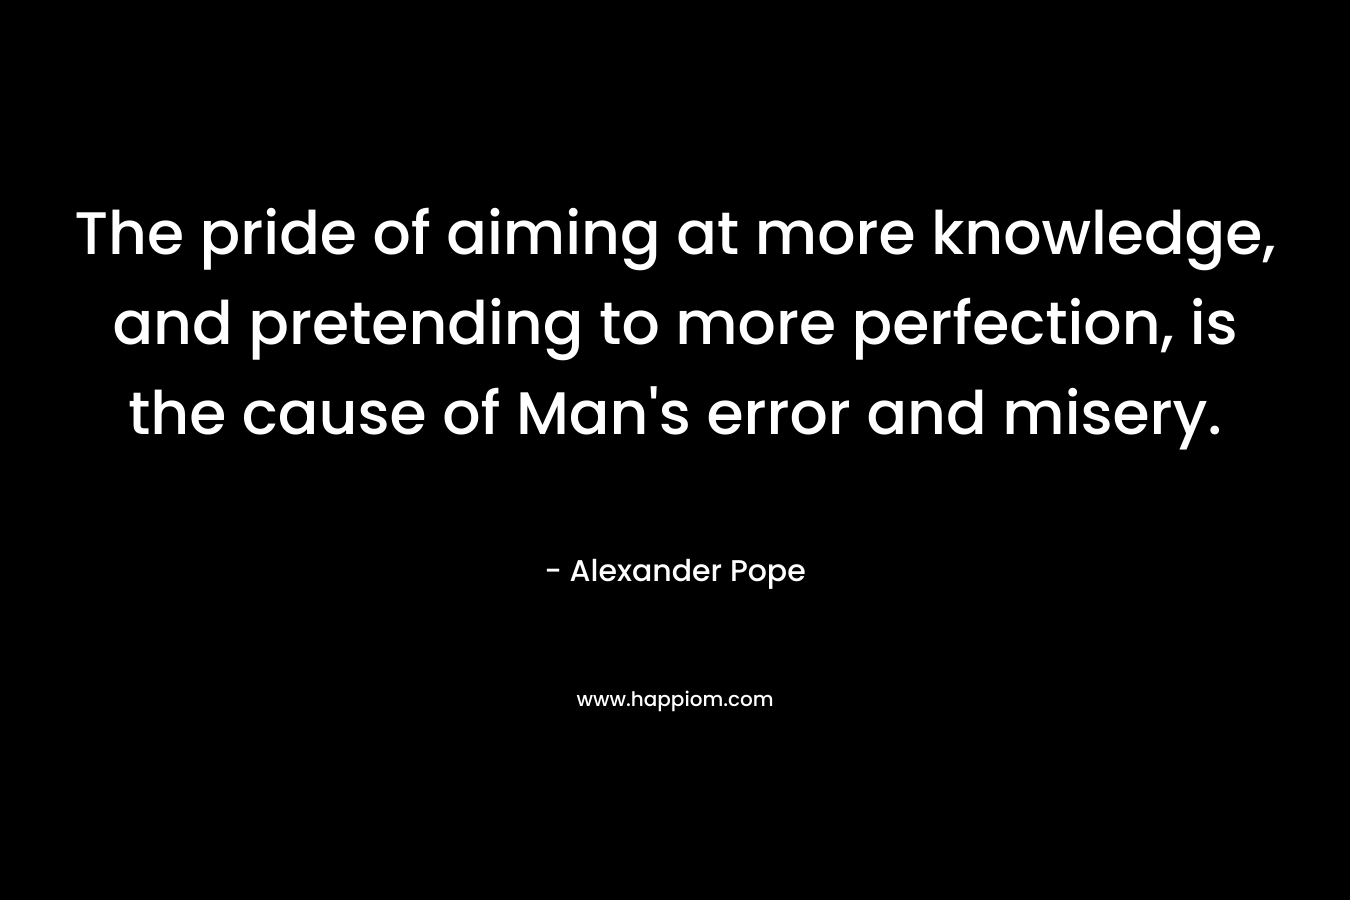 The pride of aiming at more knowledge, and pretending to more perfection, is the cause of Man's error and misery.